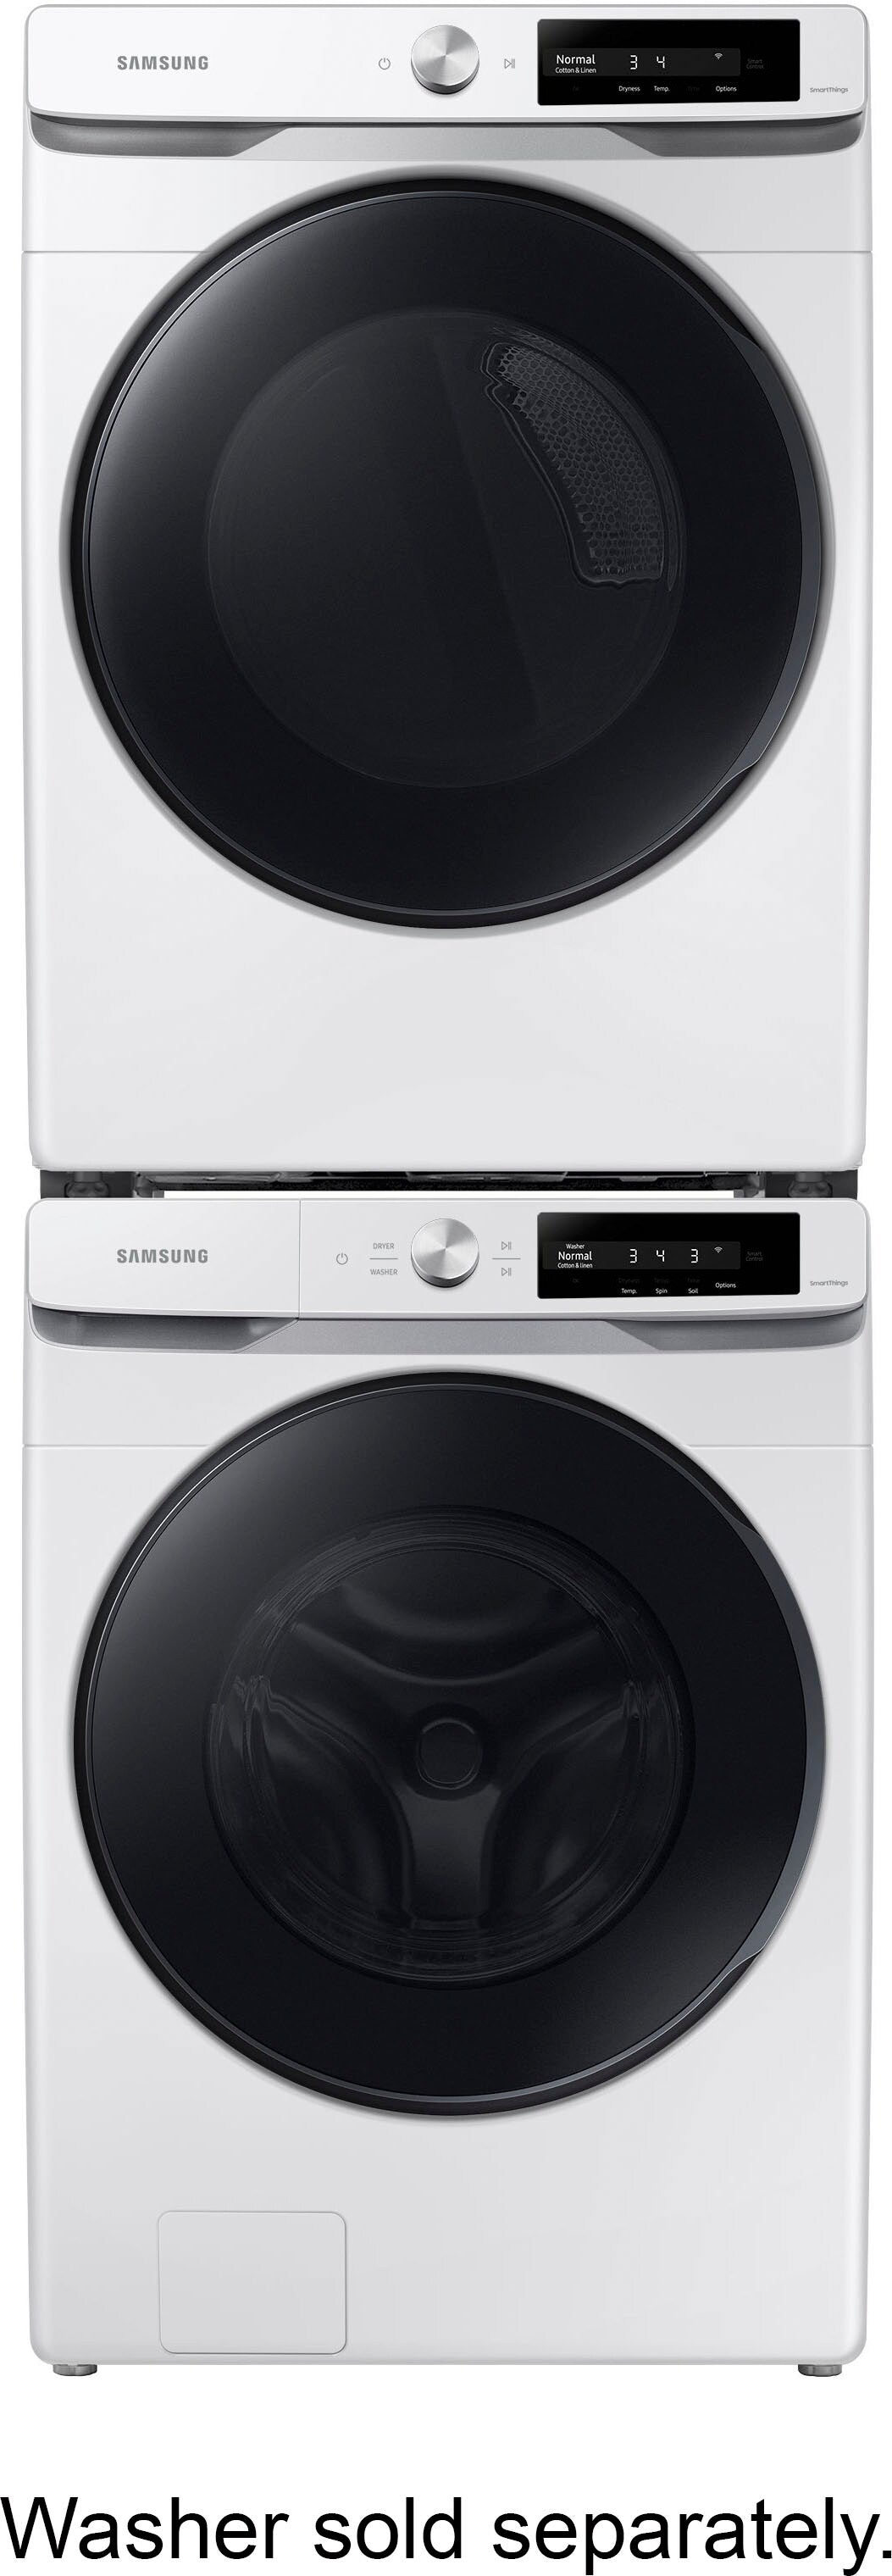 Samsung - 7.5 cu. ft. Smart Dial Gas Dryer with Super Speed Dry - White_12